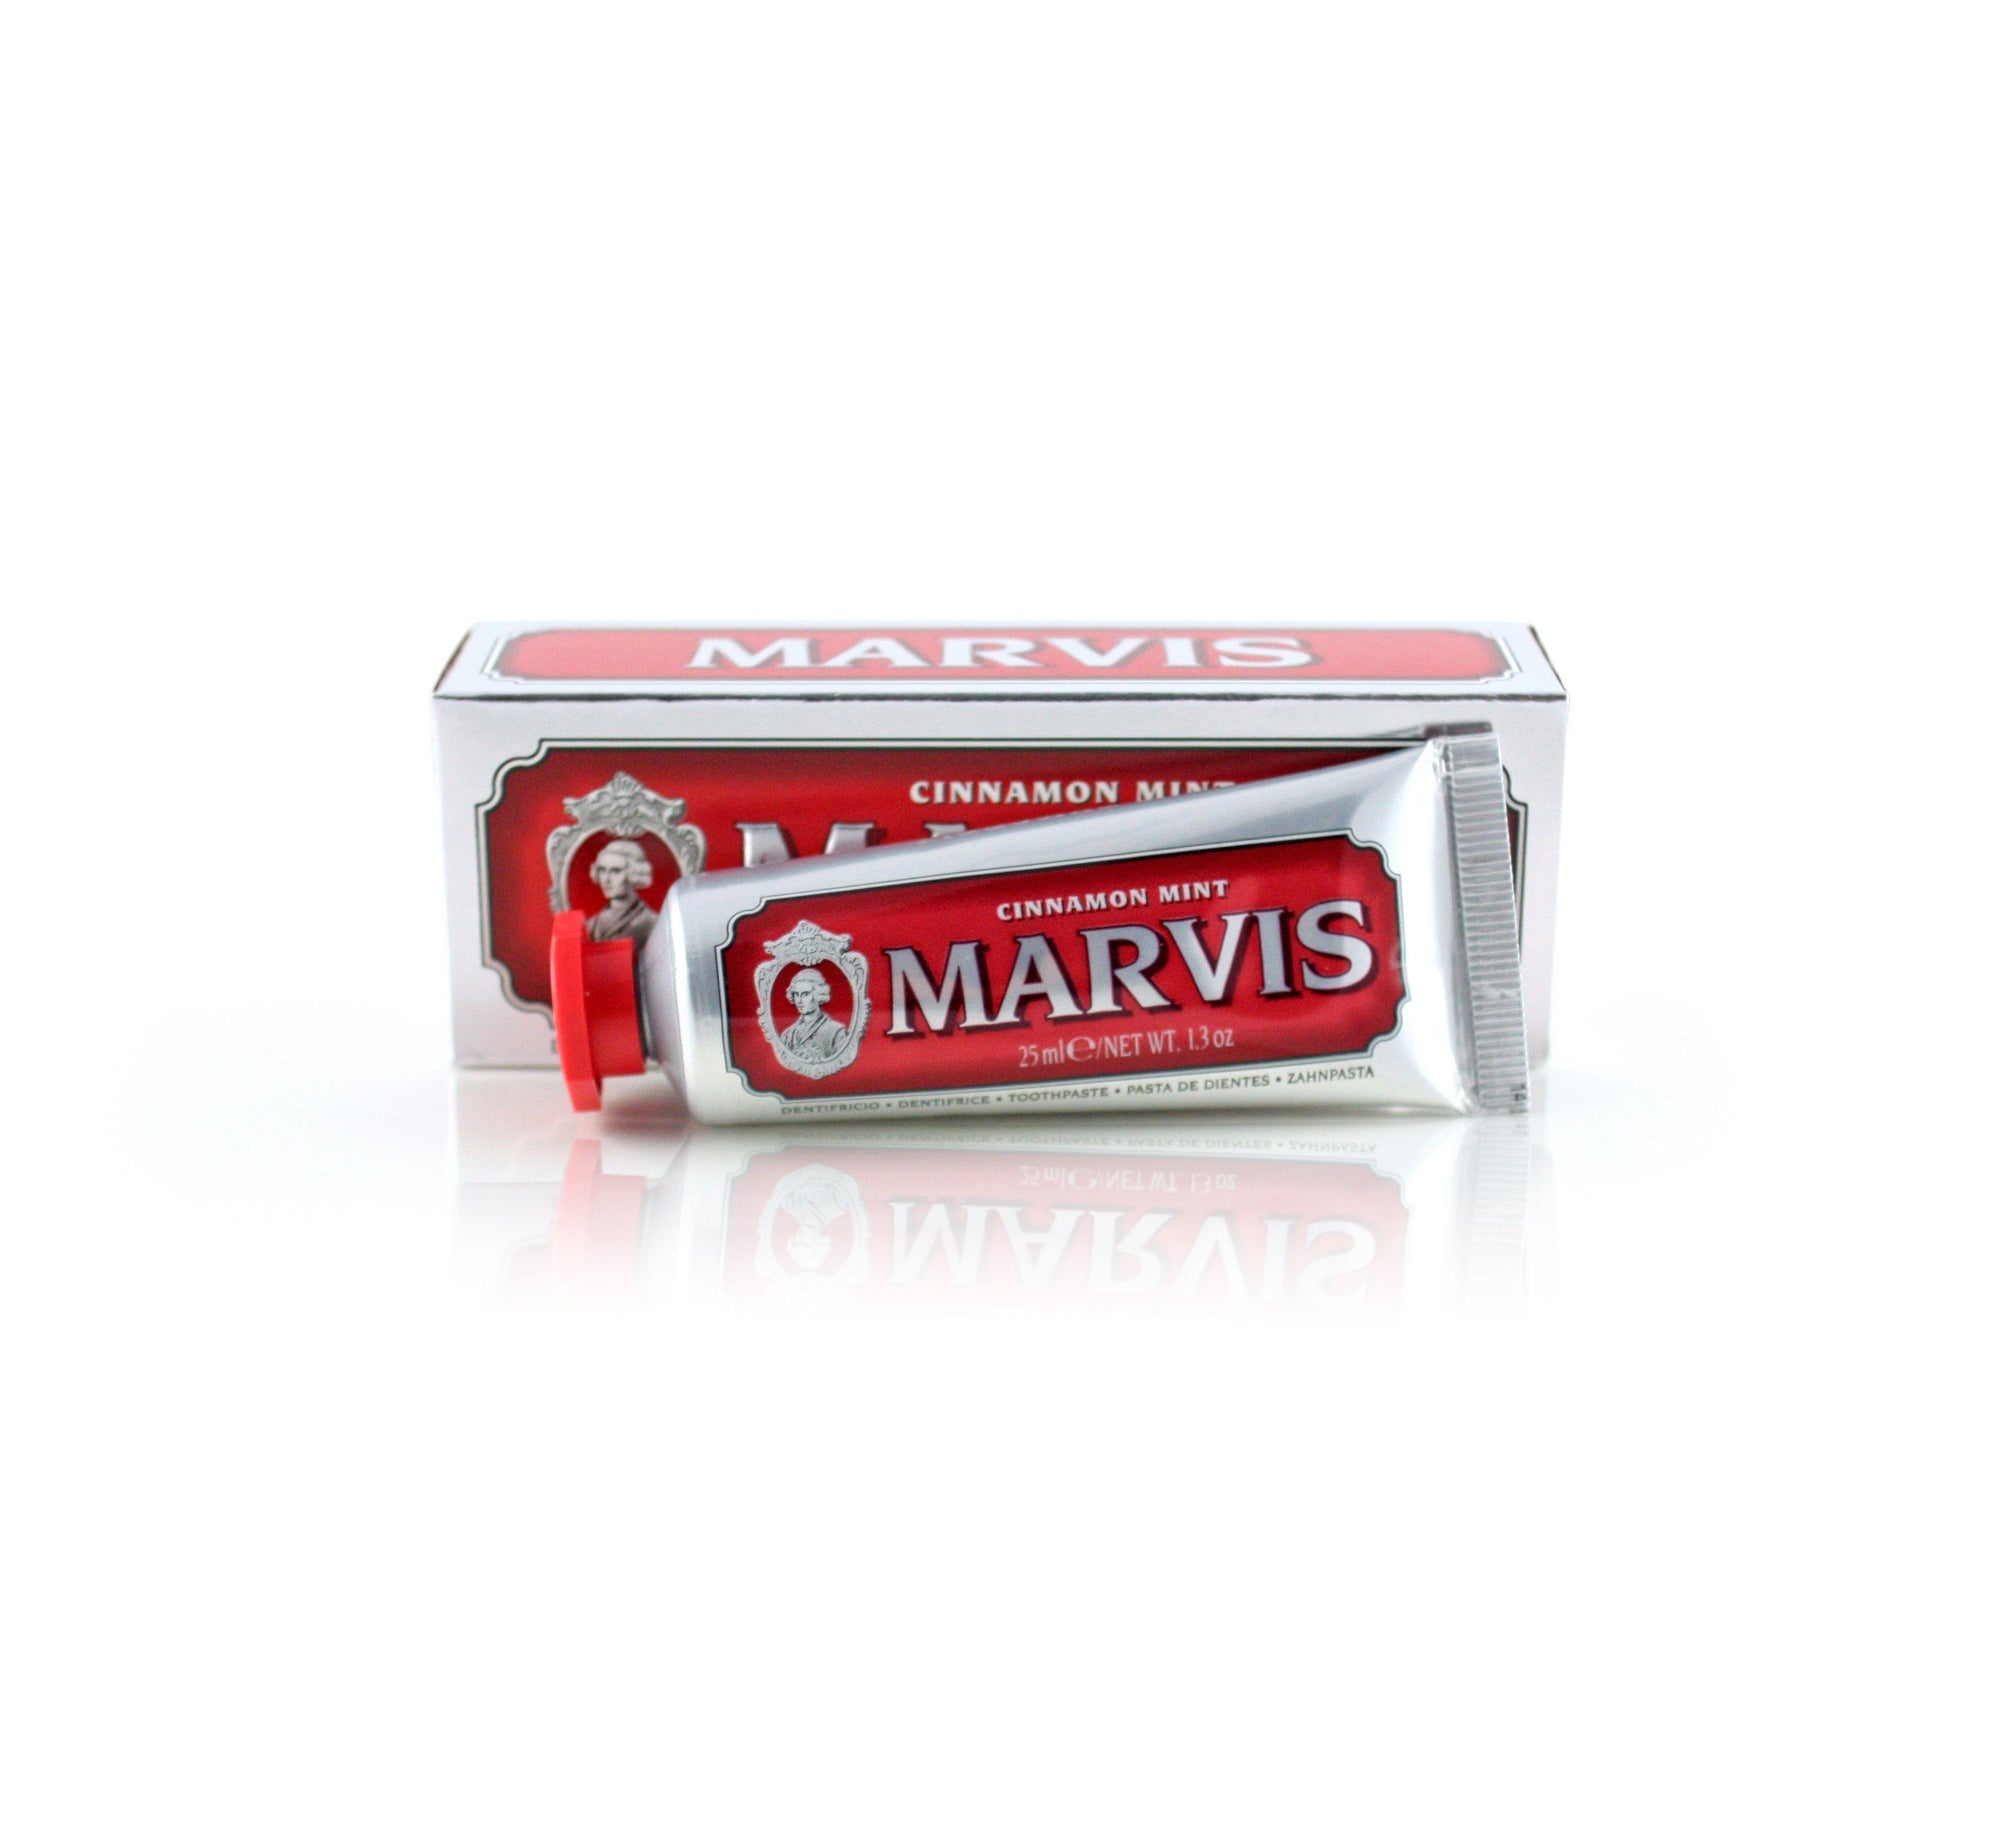 Marvis Cinnamon Mint Toothpaste - Travel Size - Soap & Water Everyday